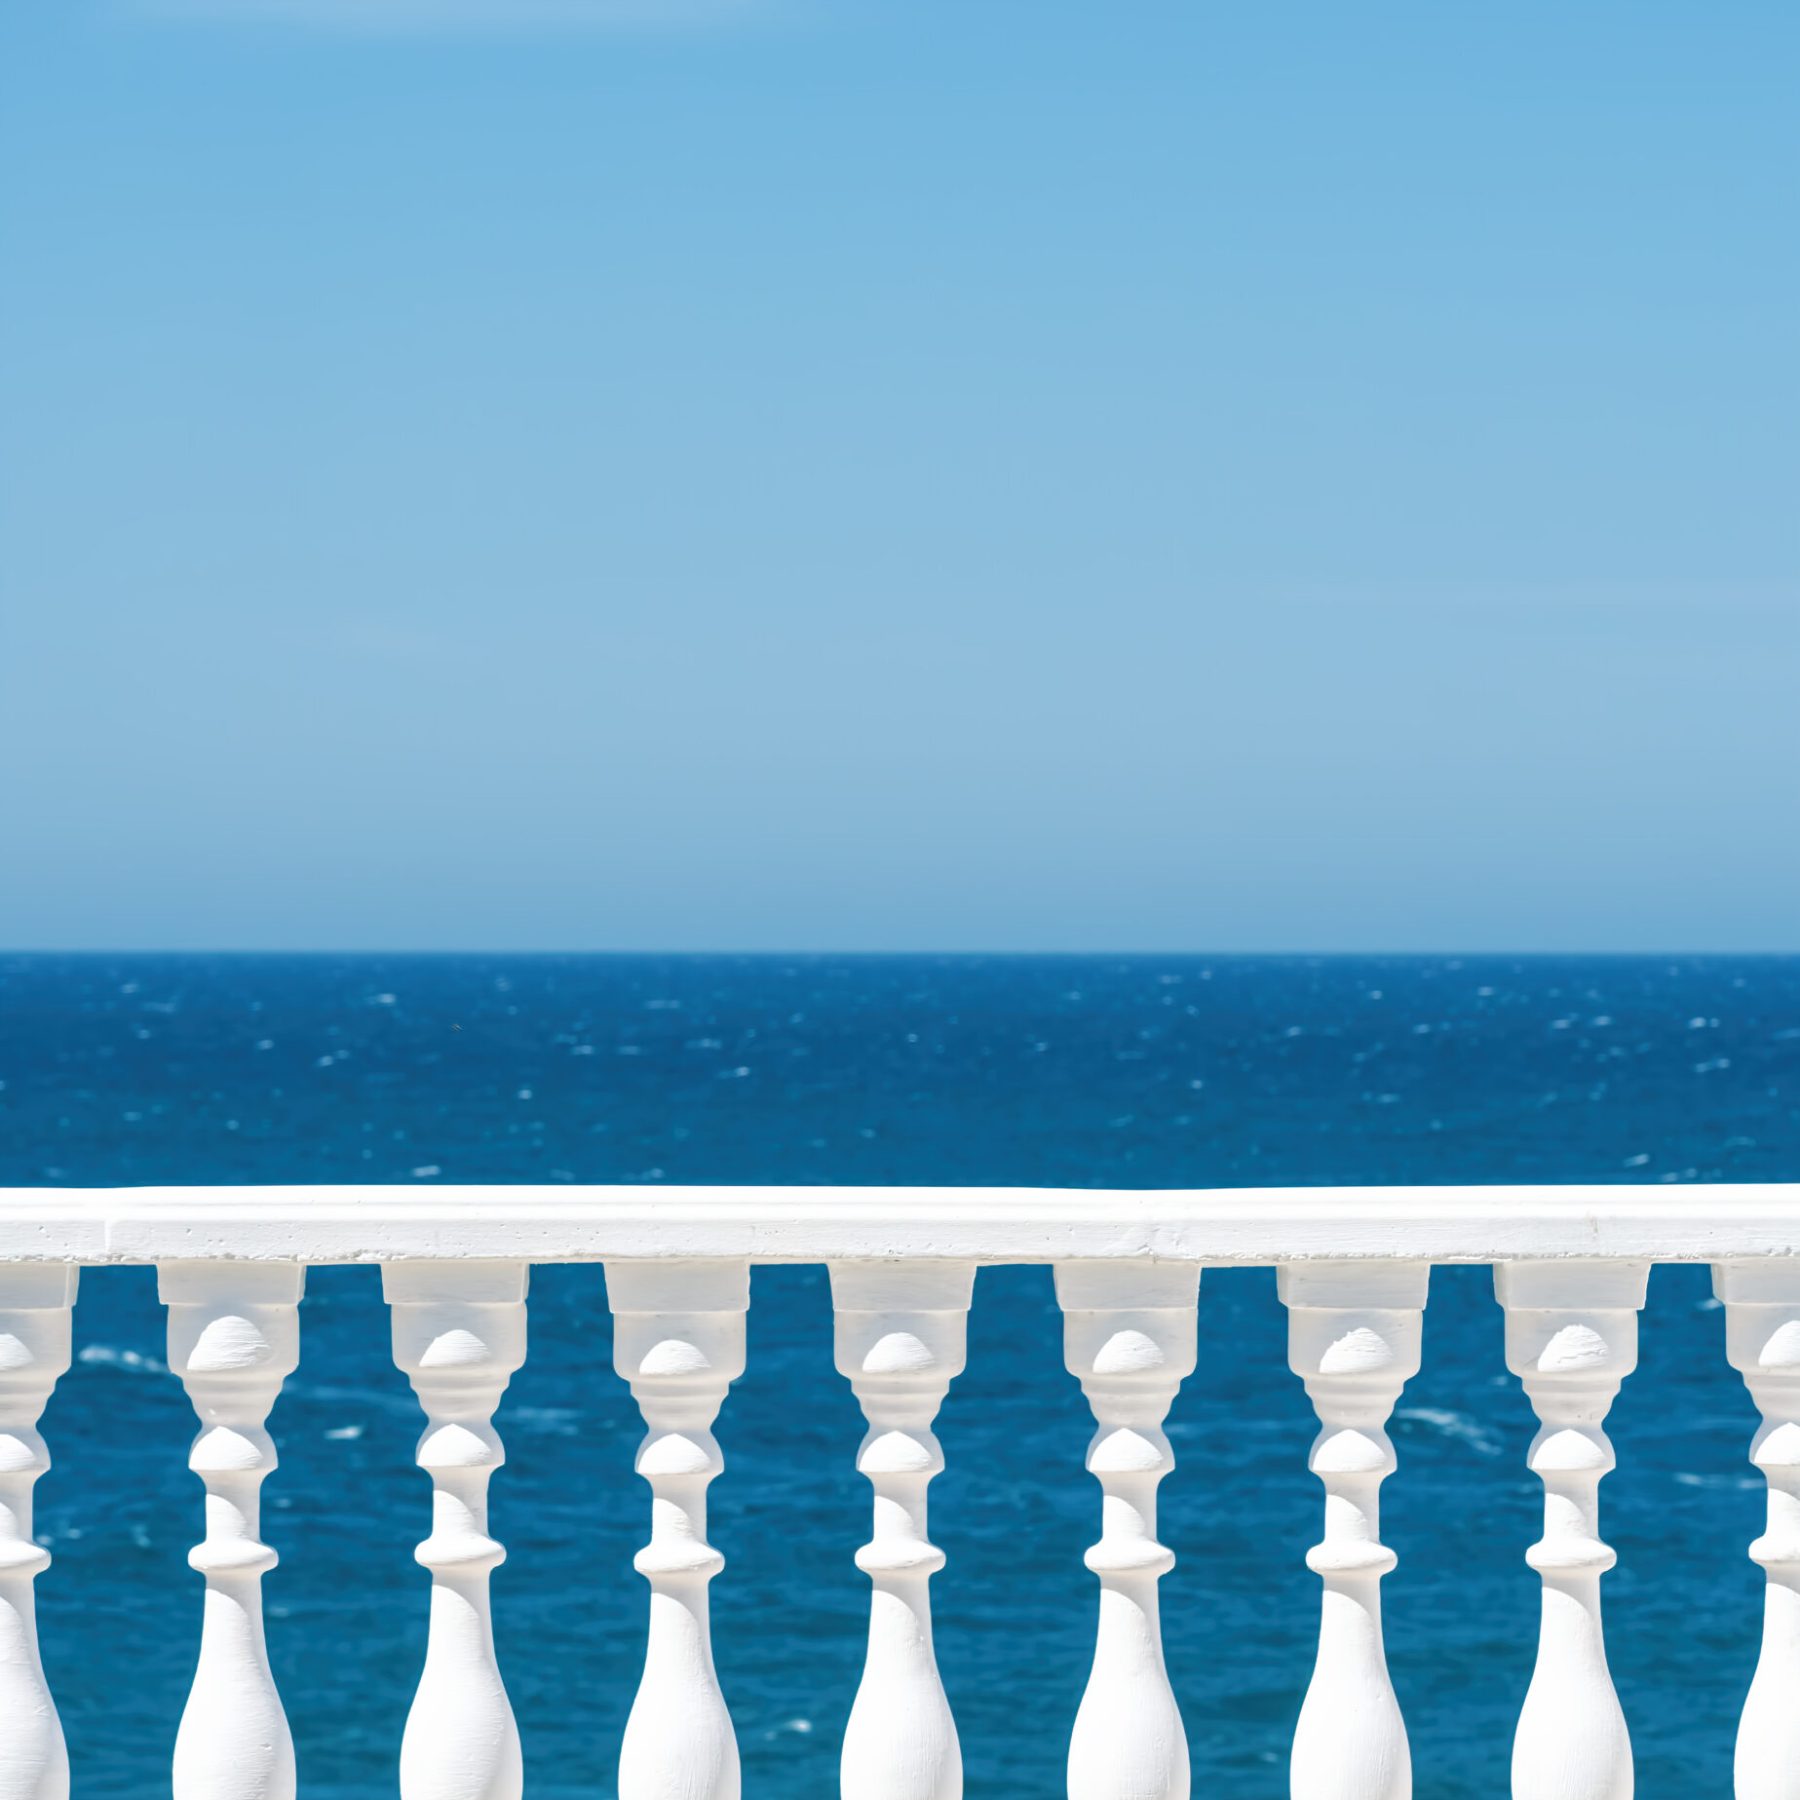 Classic roman white concrete railing outside the building on the terrace or promenade overlooking the sea with blue sky and clouds on the background. Close-up, with copy space.